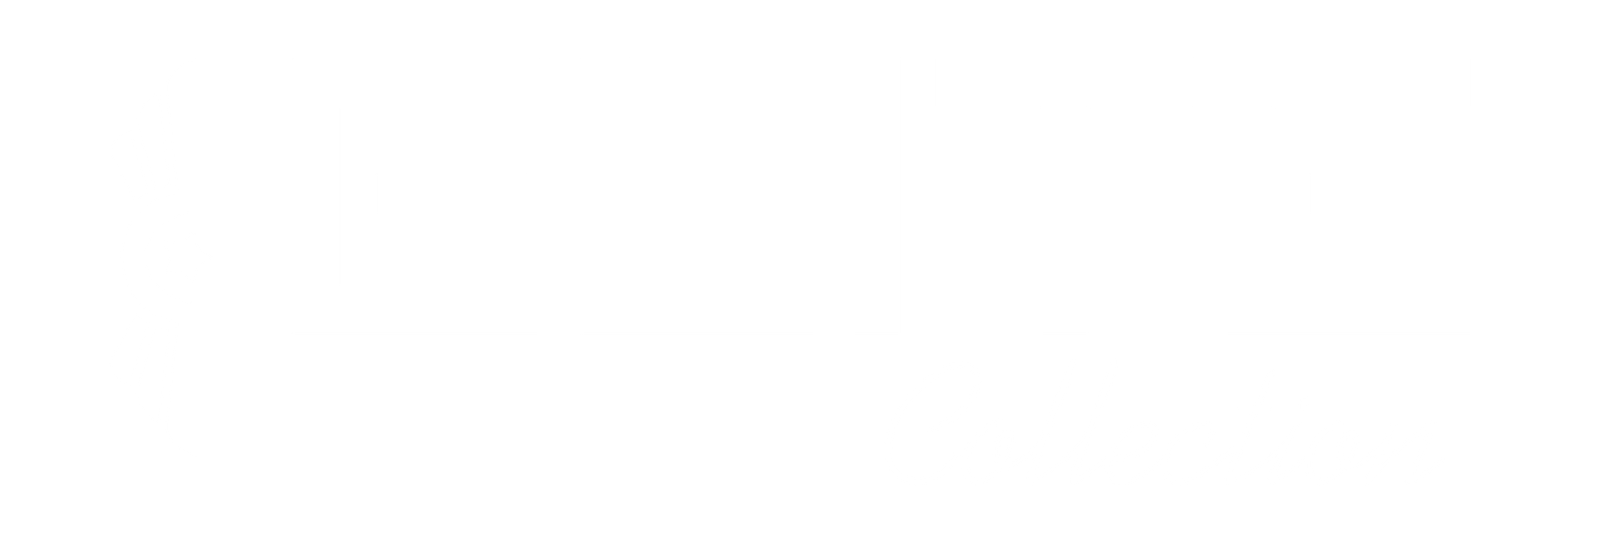 Collection logos_for -17